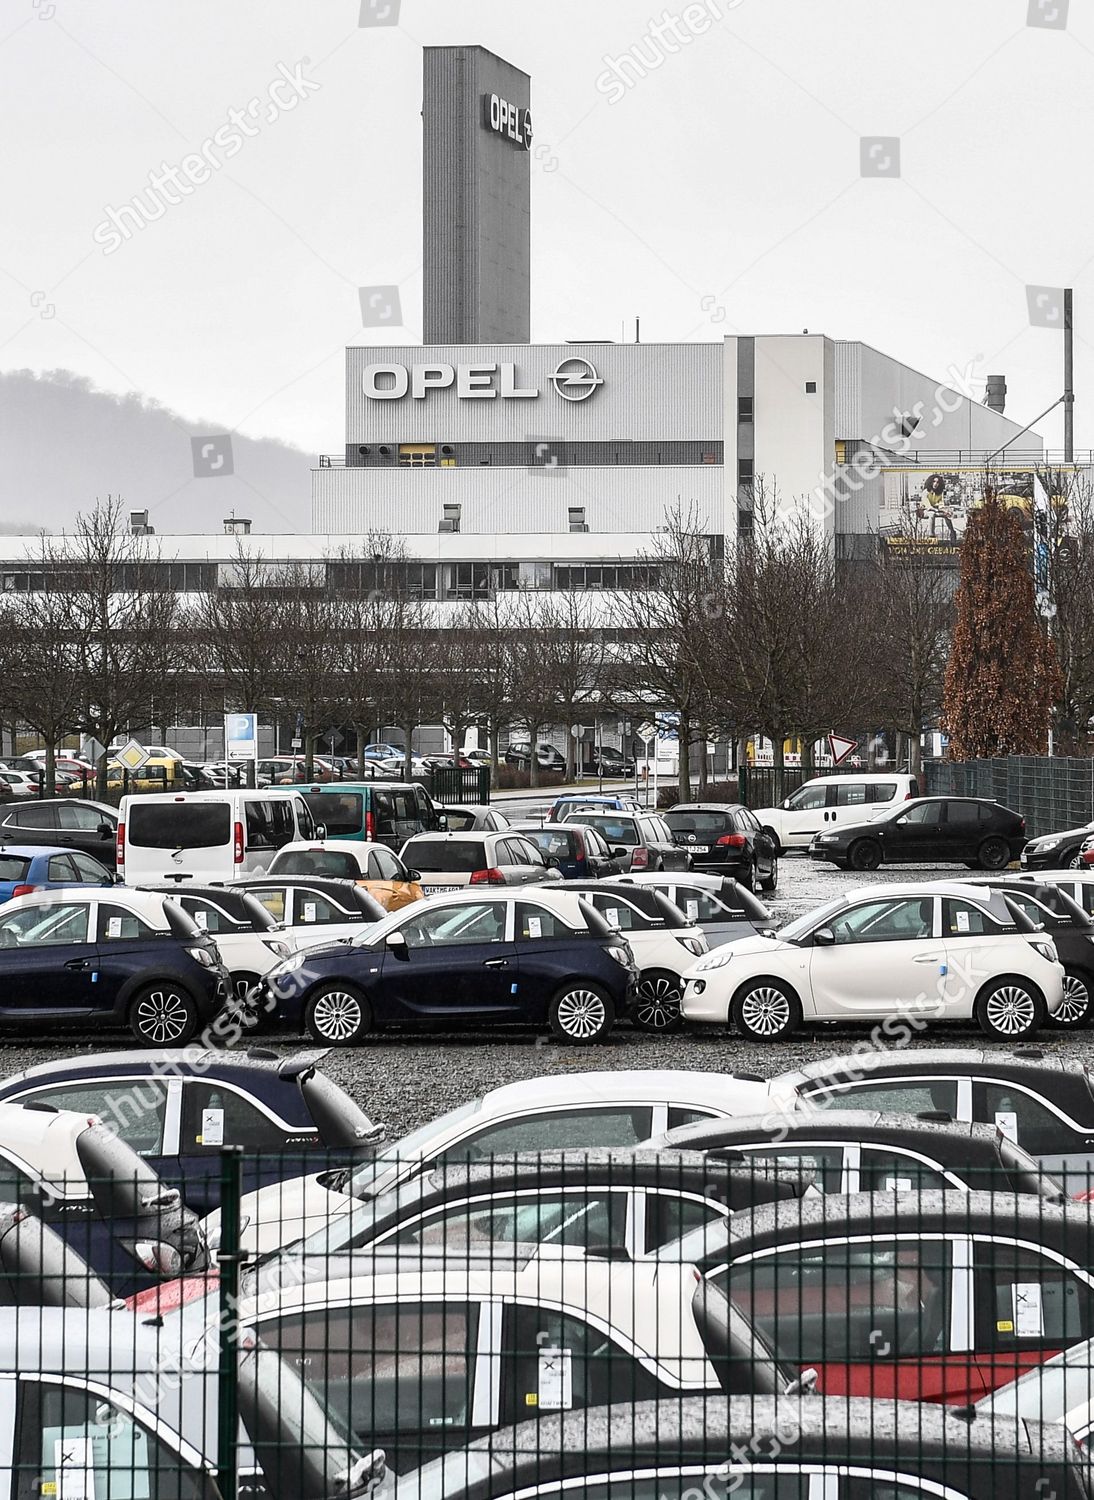 New Opel Cars Infornt Factory Building German Editorial Stock Photo Stock Image Shutterstock